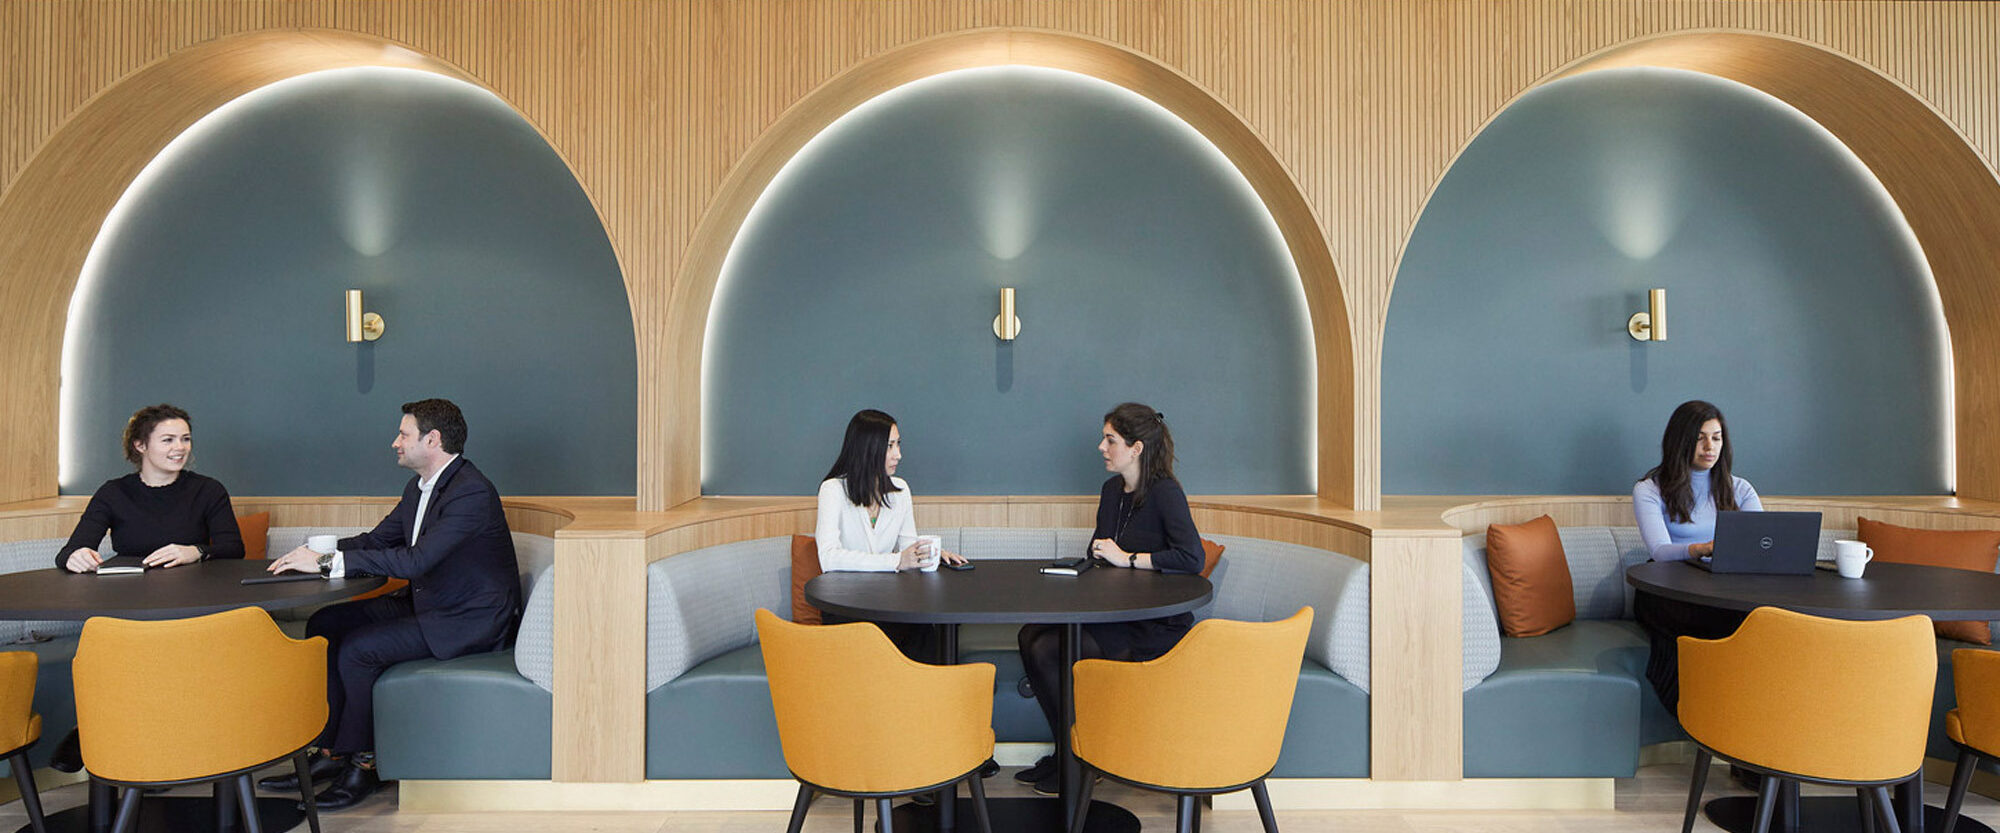 Contemporary office breakout area featuring teal arched alcoves with built-in seating, walnut wood accents, and mustard upholstered chairs. Individuals are casually engaged in work and conversation, affirming the space's collaborative design intent.